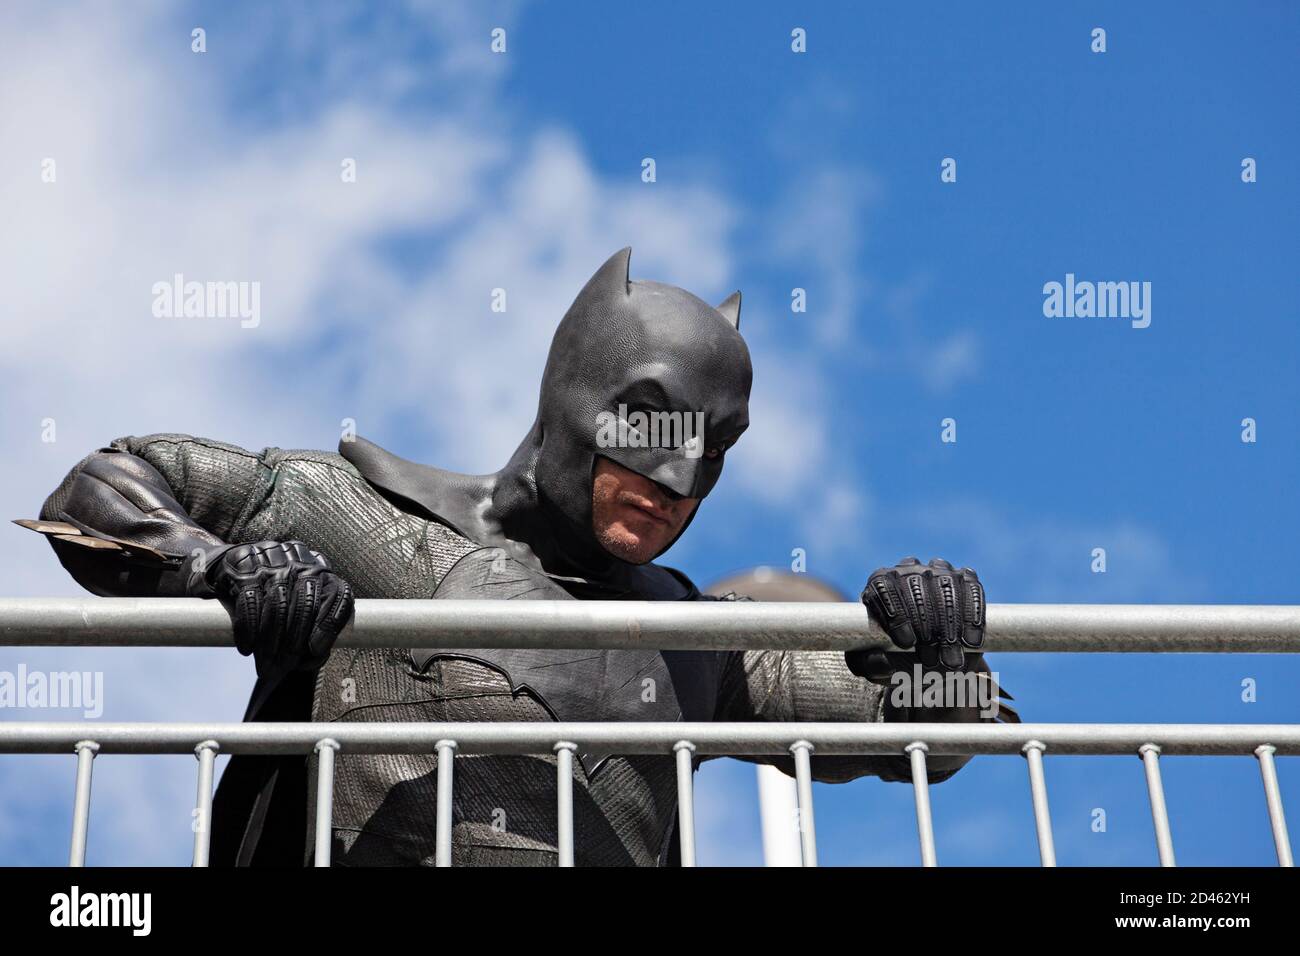 Umea, Norrland Sweden - September 5, 2020: Batman stands by metal fence and looks down Stock Photo